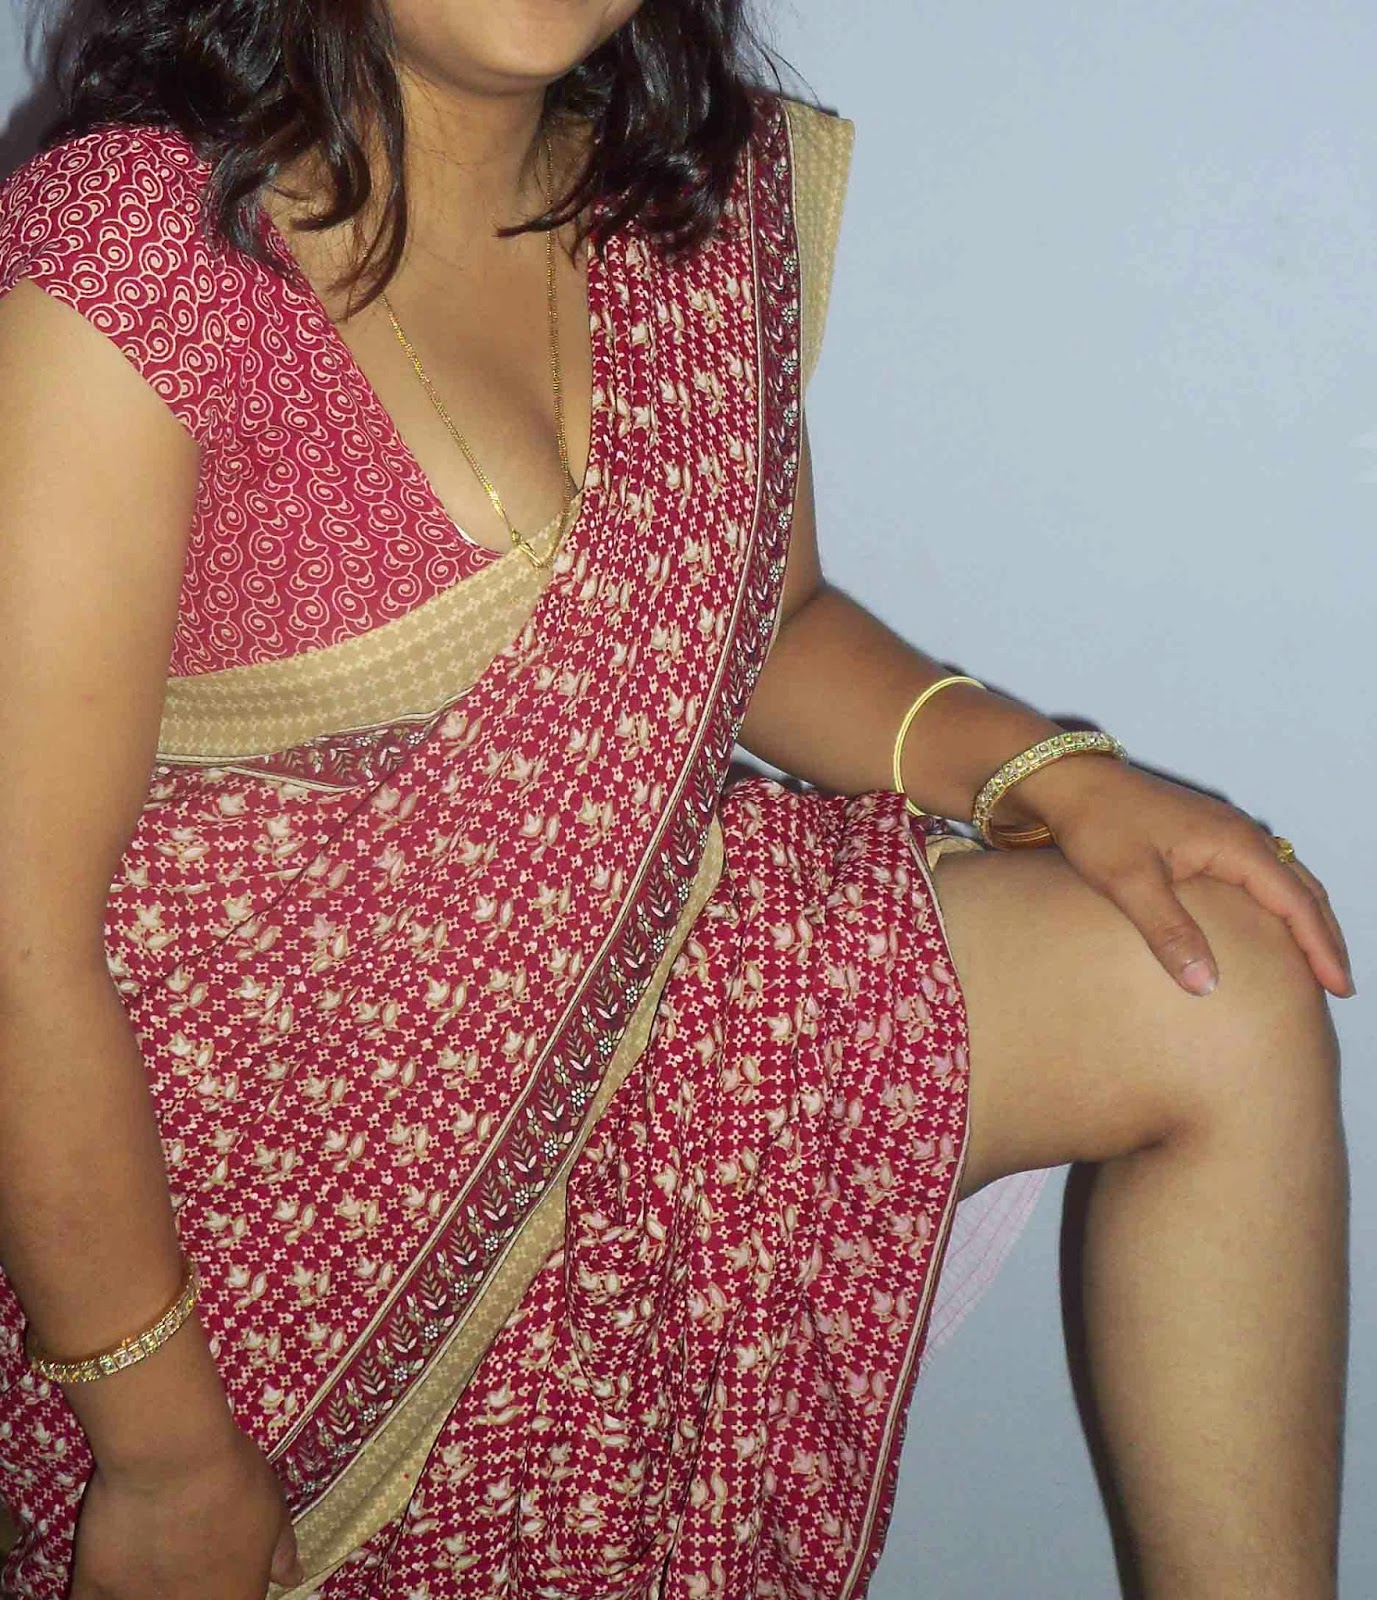 Tamil girl long hair xvideo pictures